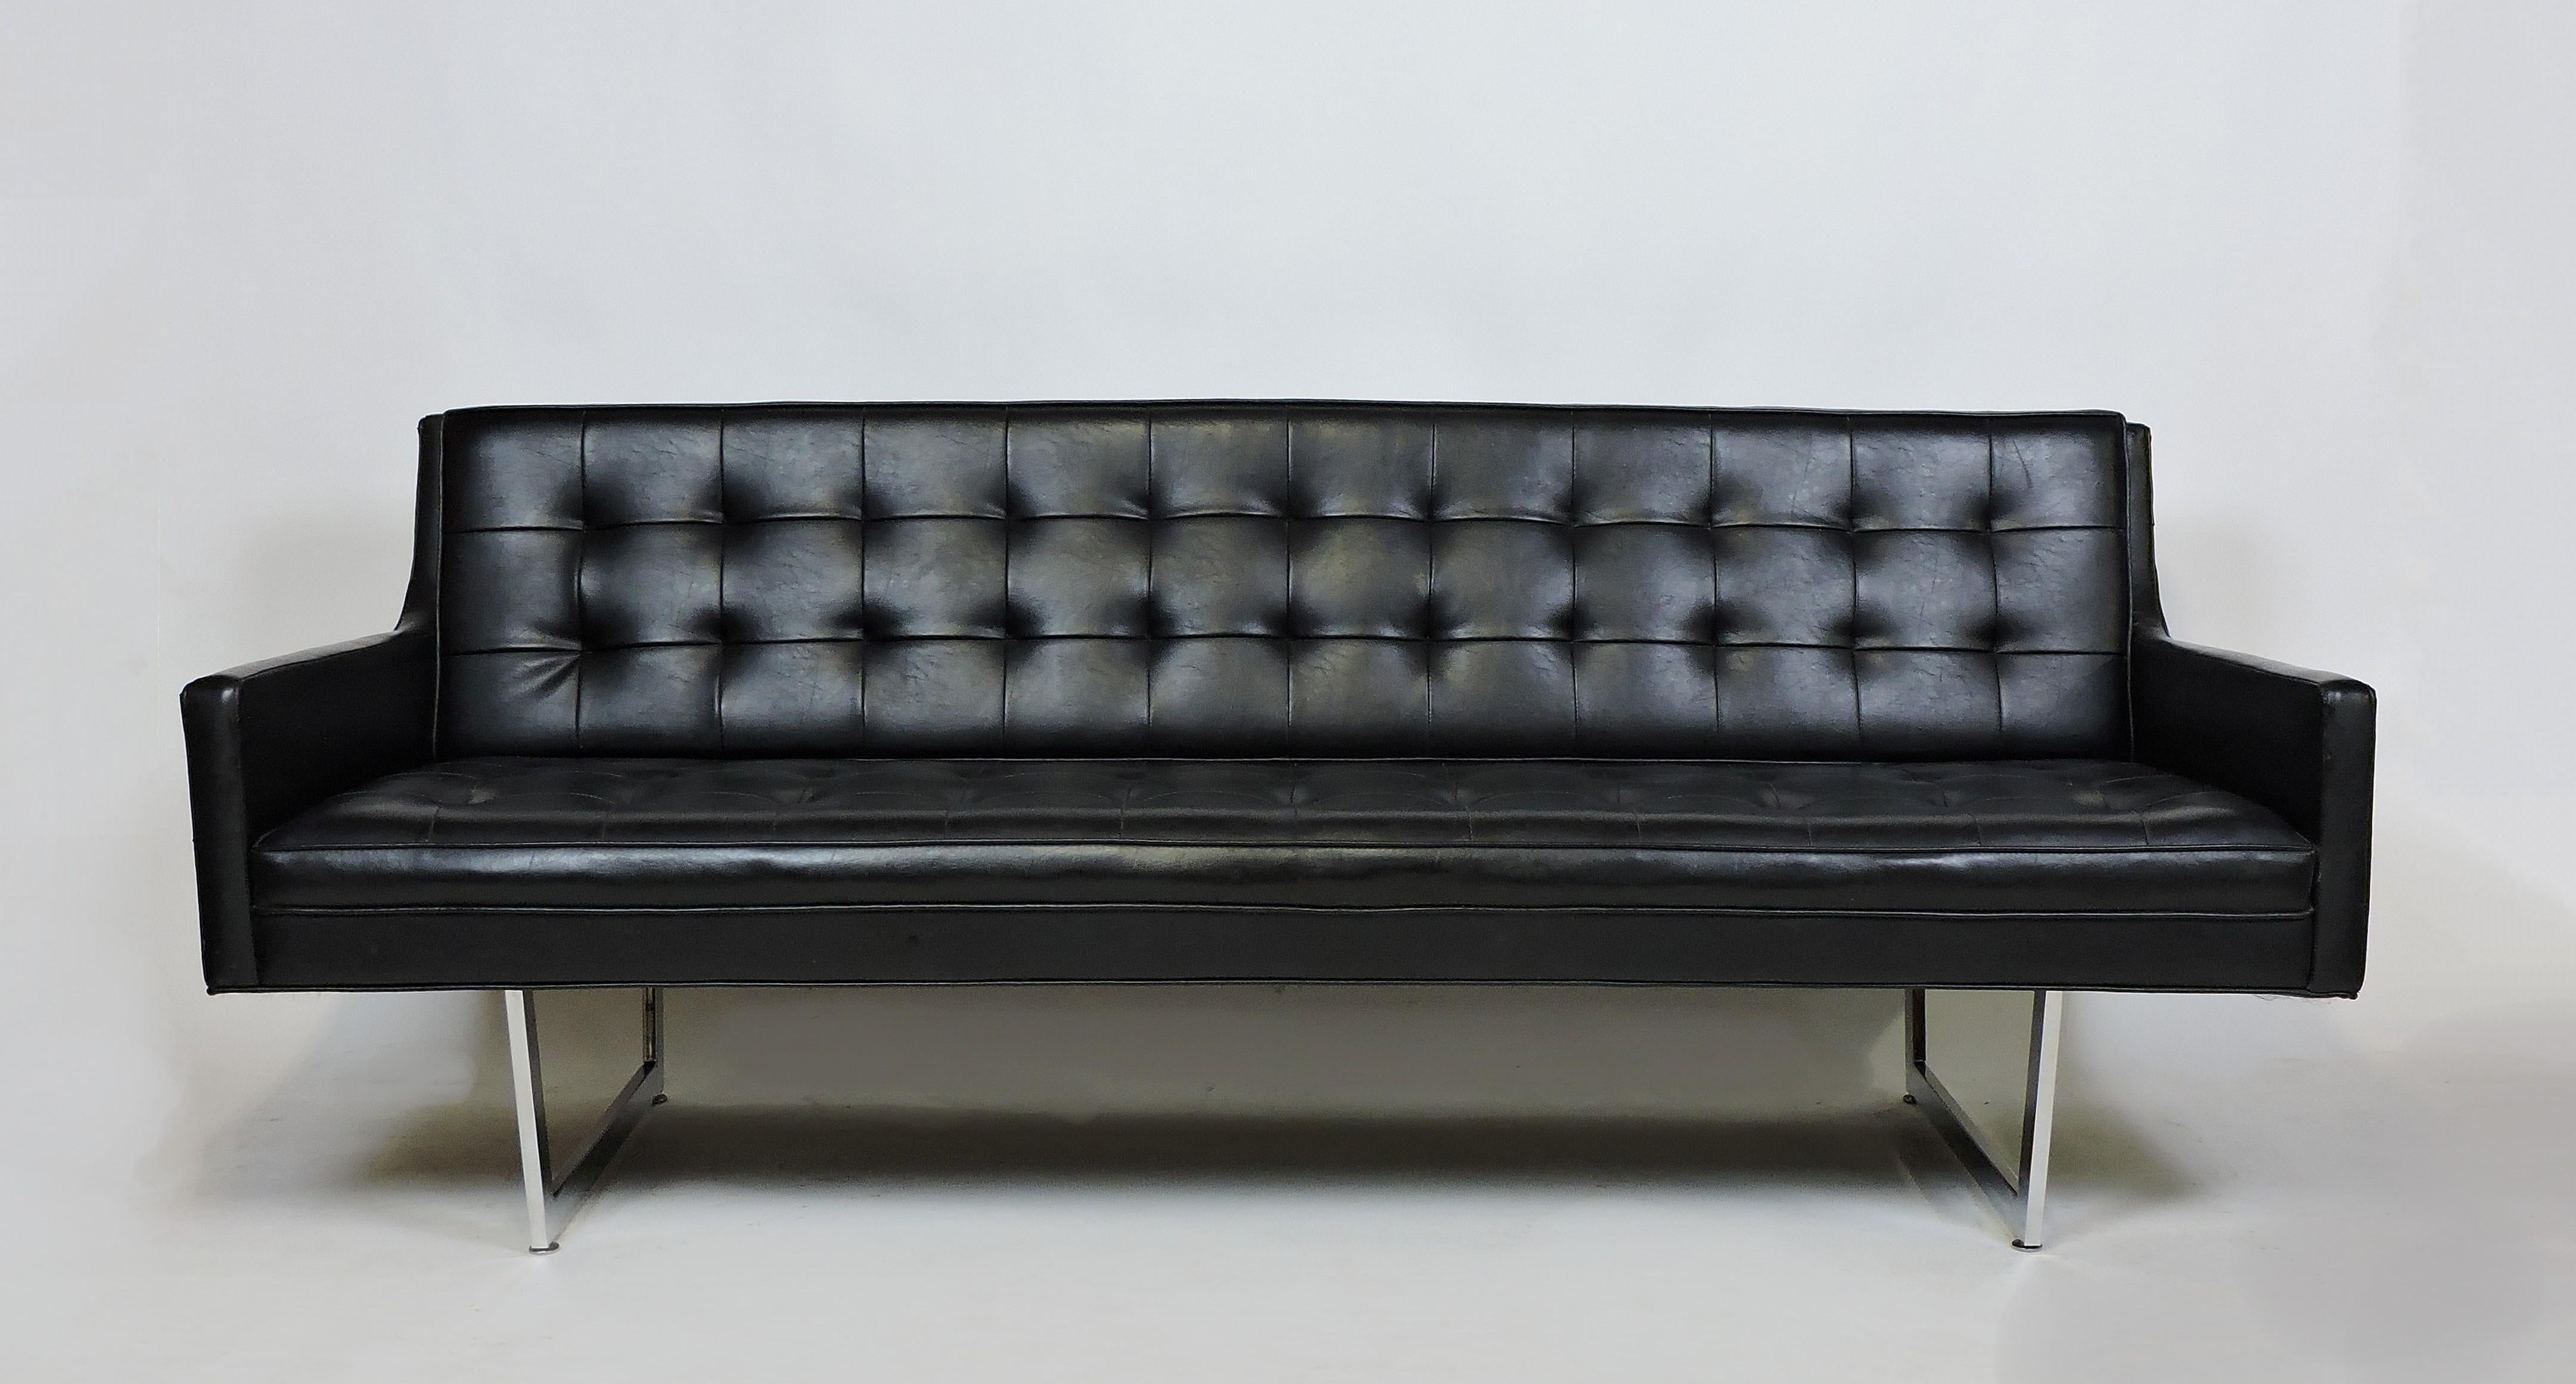 Sleek and Minimalist styled sofa manufactured by high quality furniture maker, Patrician Furniture Company. This sofa has tufted black Naugahyde upholstery and rests on a thin chrome sled base. Comfortable and sturdy with a great clean, modern